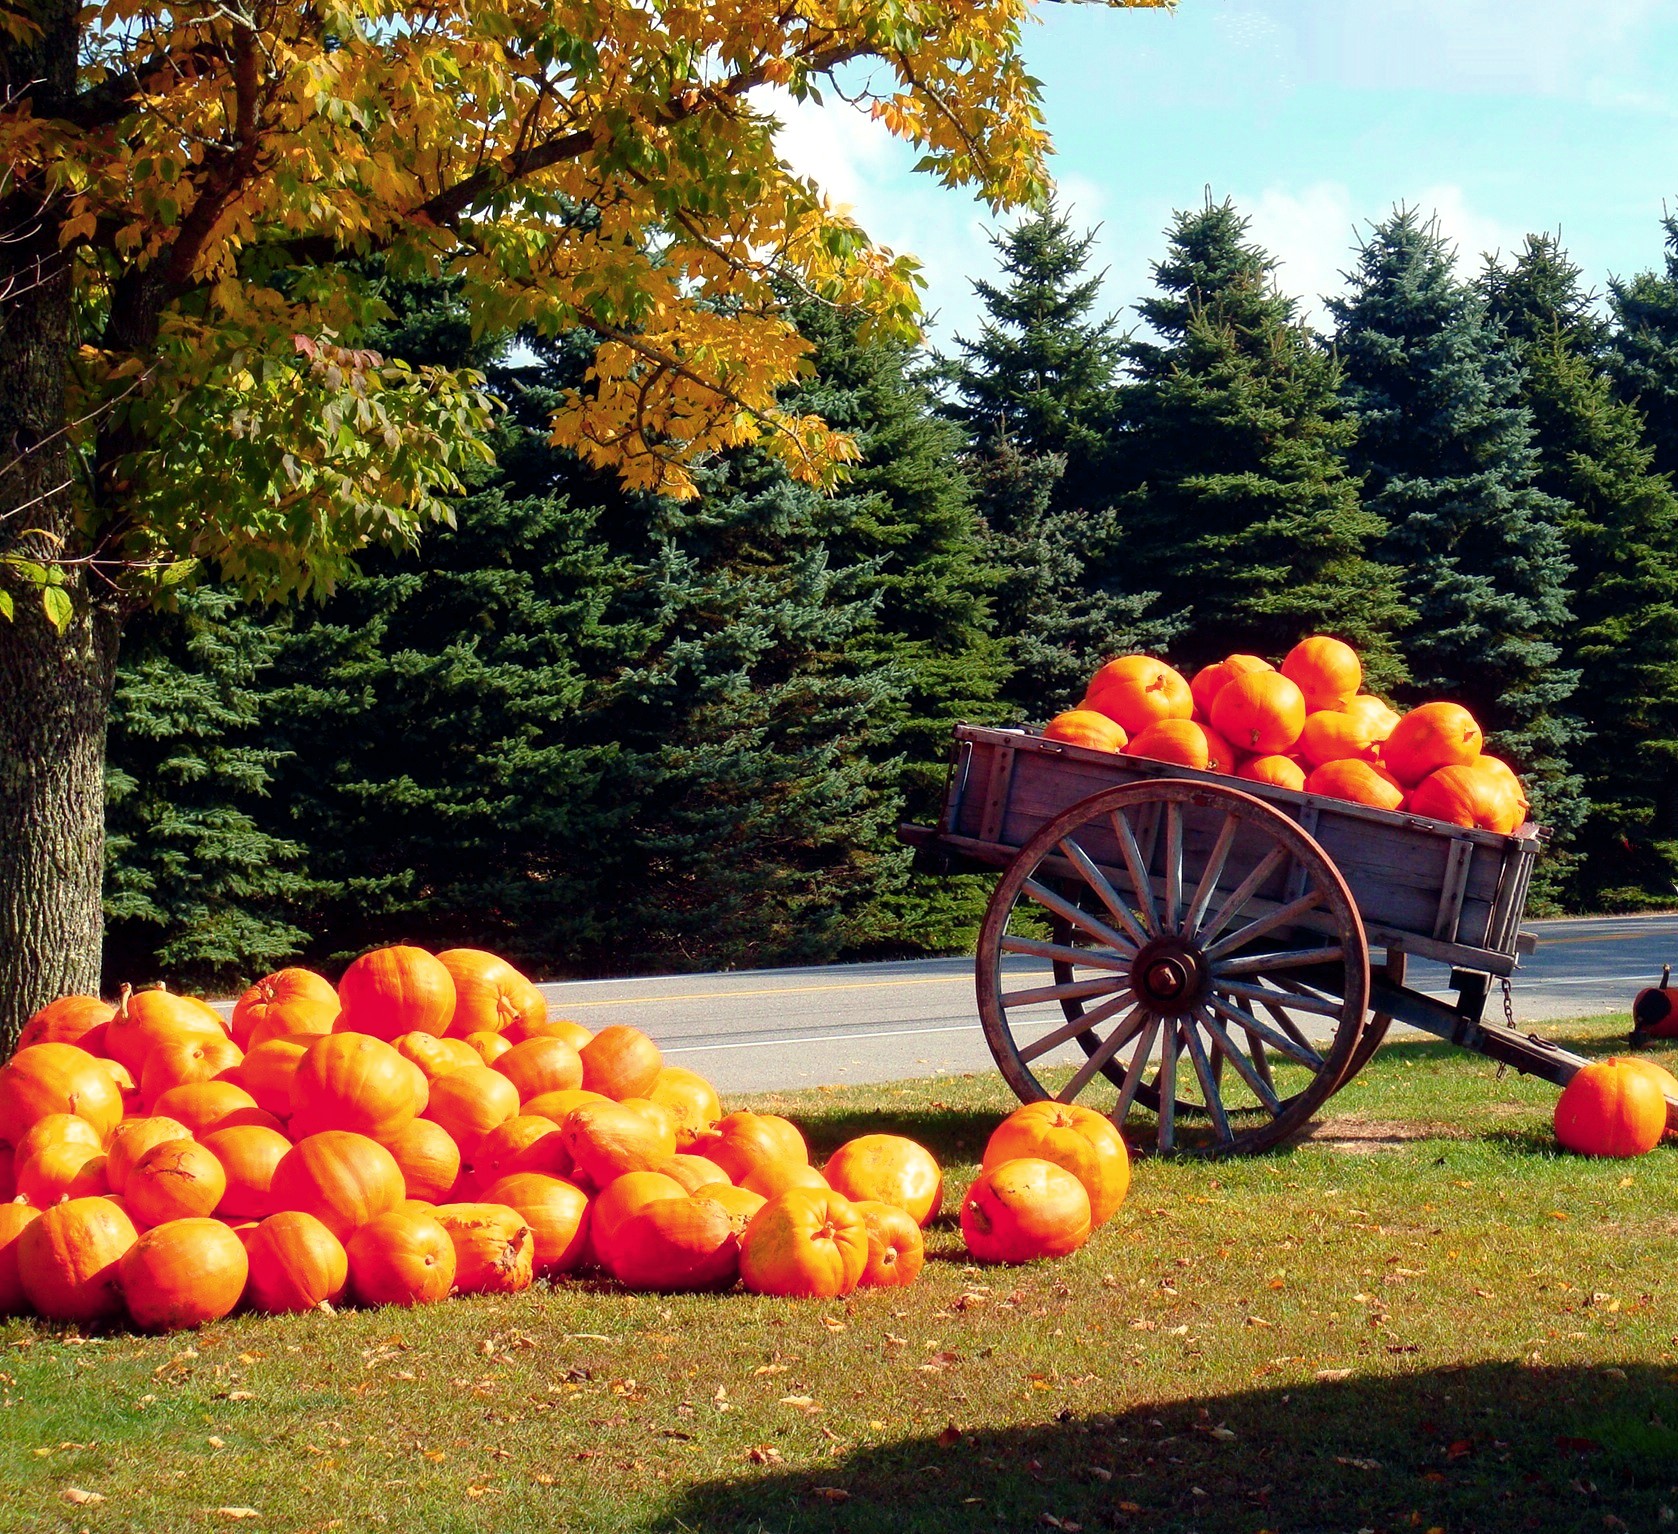 Pumpkin Time In Wells, Maine  (user submitted)